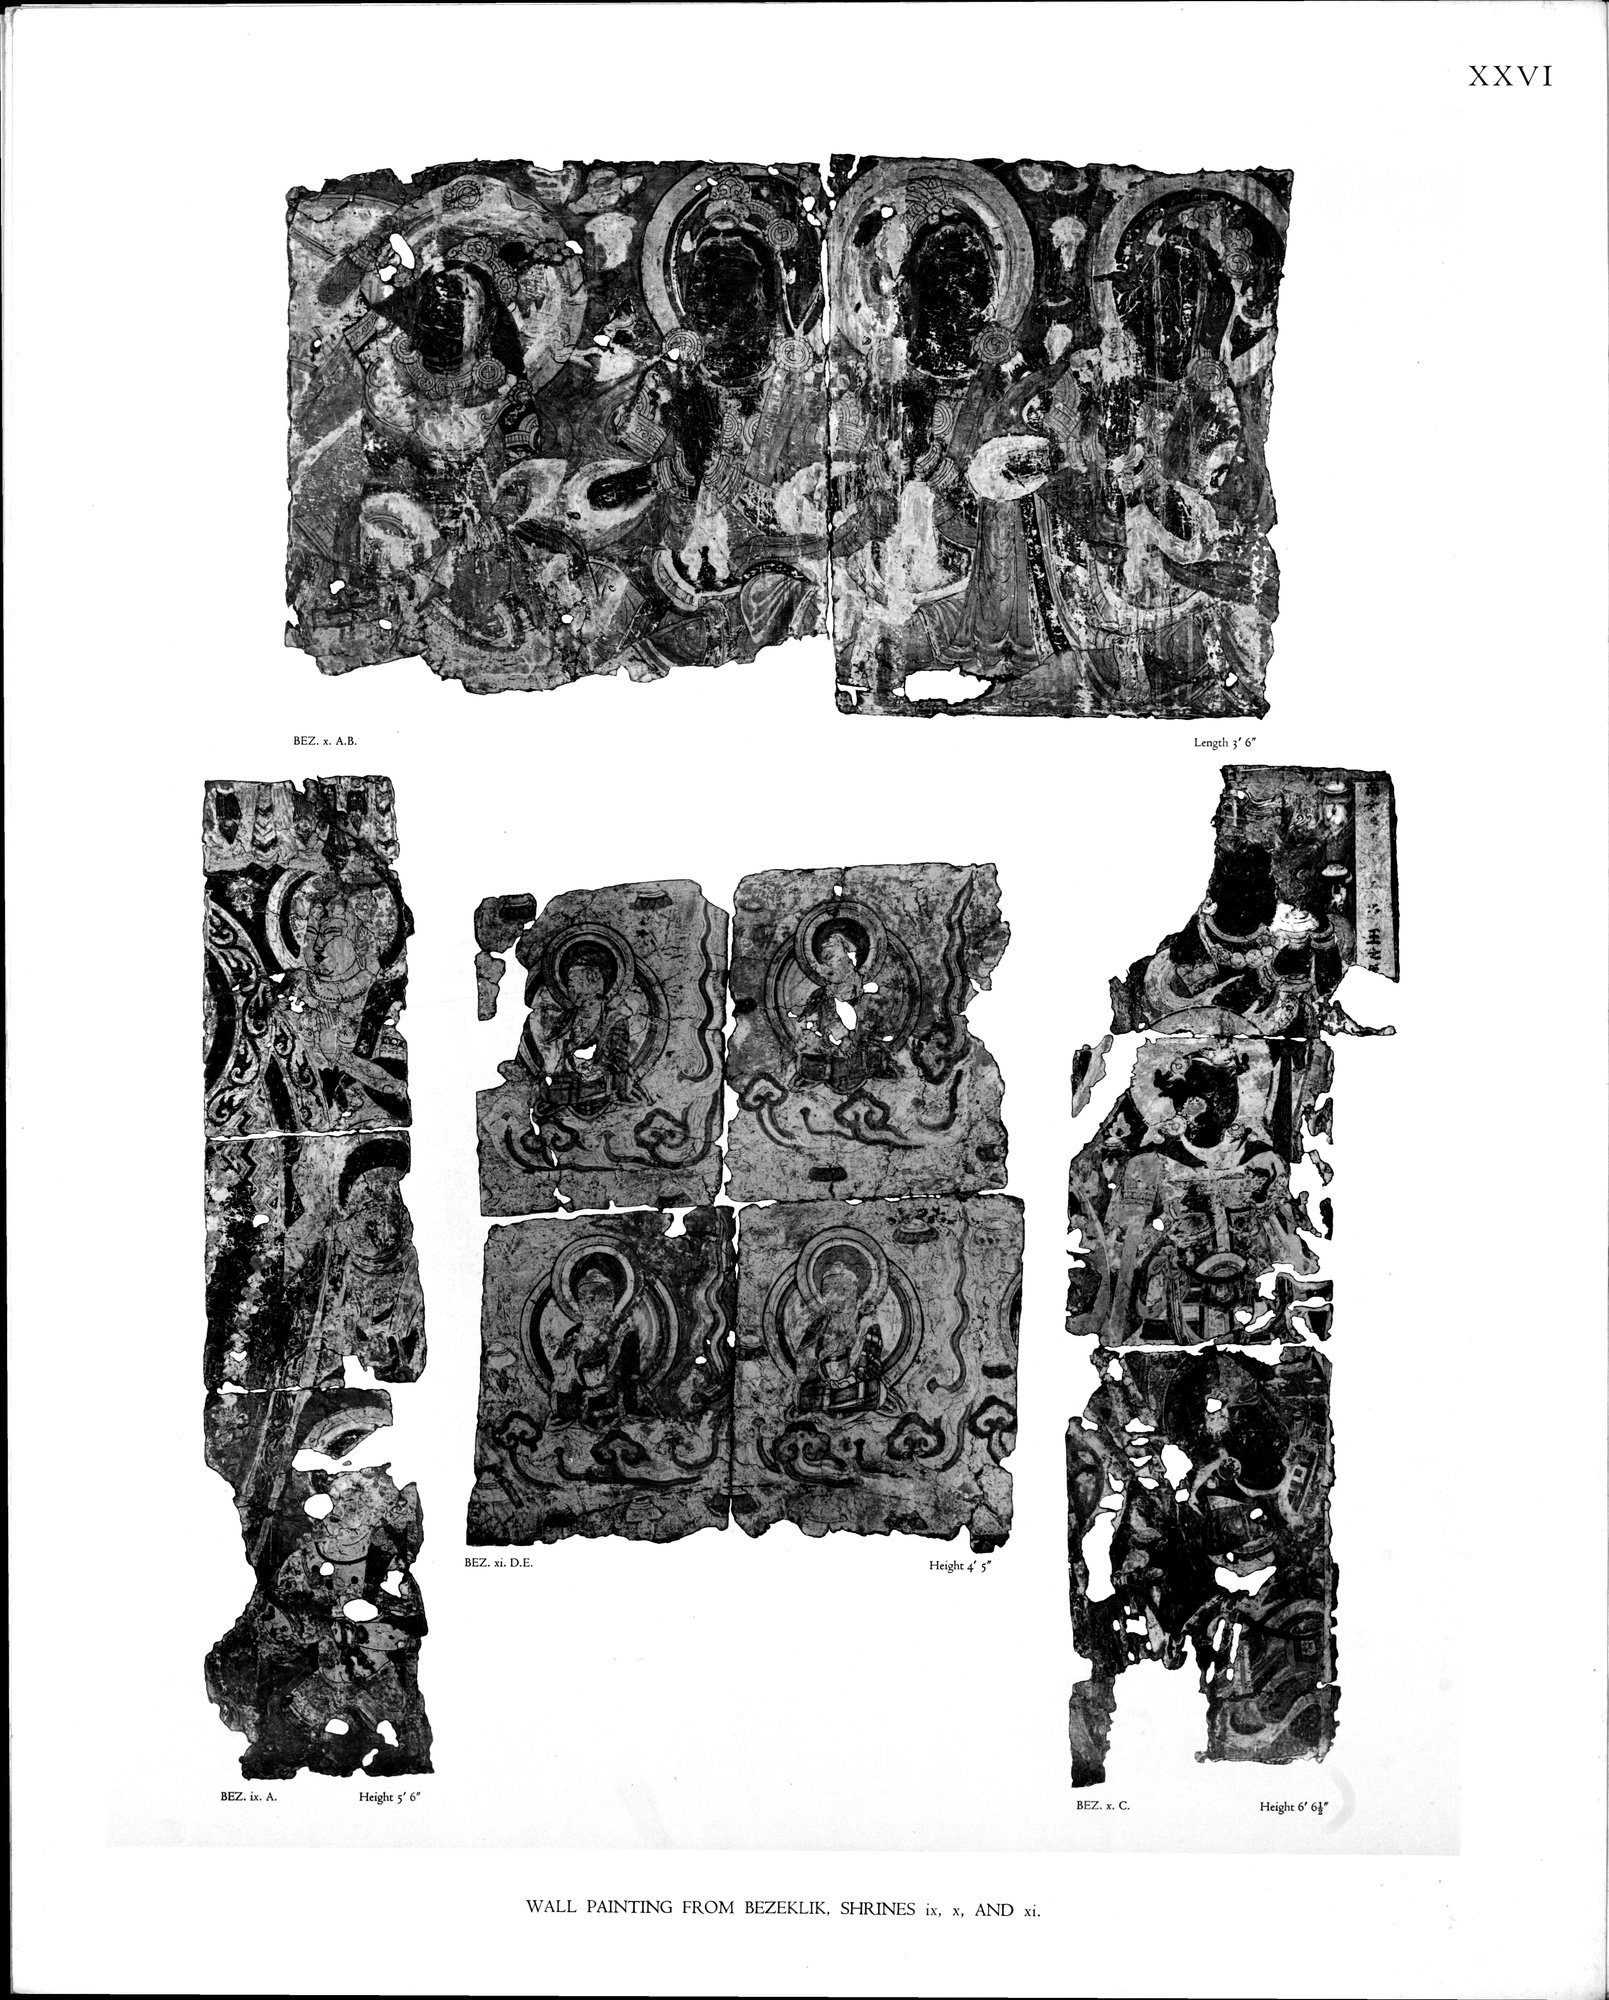 Wall Paintings from Ancient Shrines in Central Asia : vol.2 / 29 ページ（白黒高解像度画像）